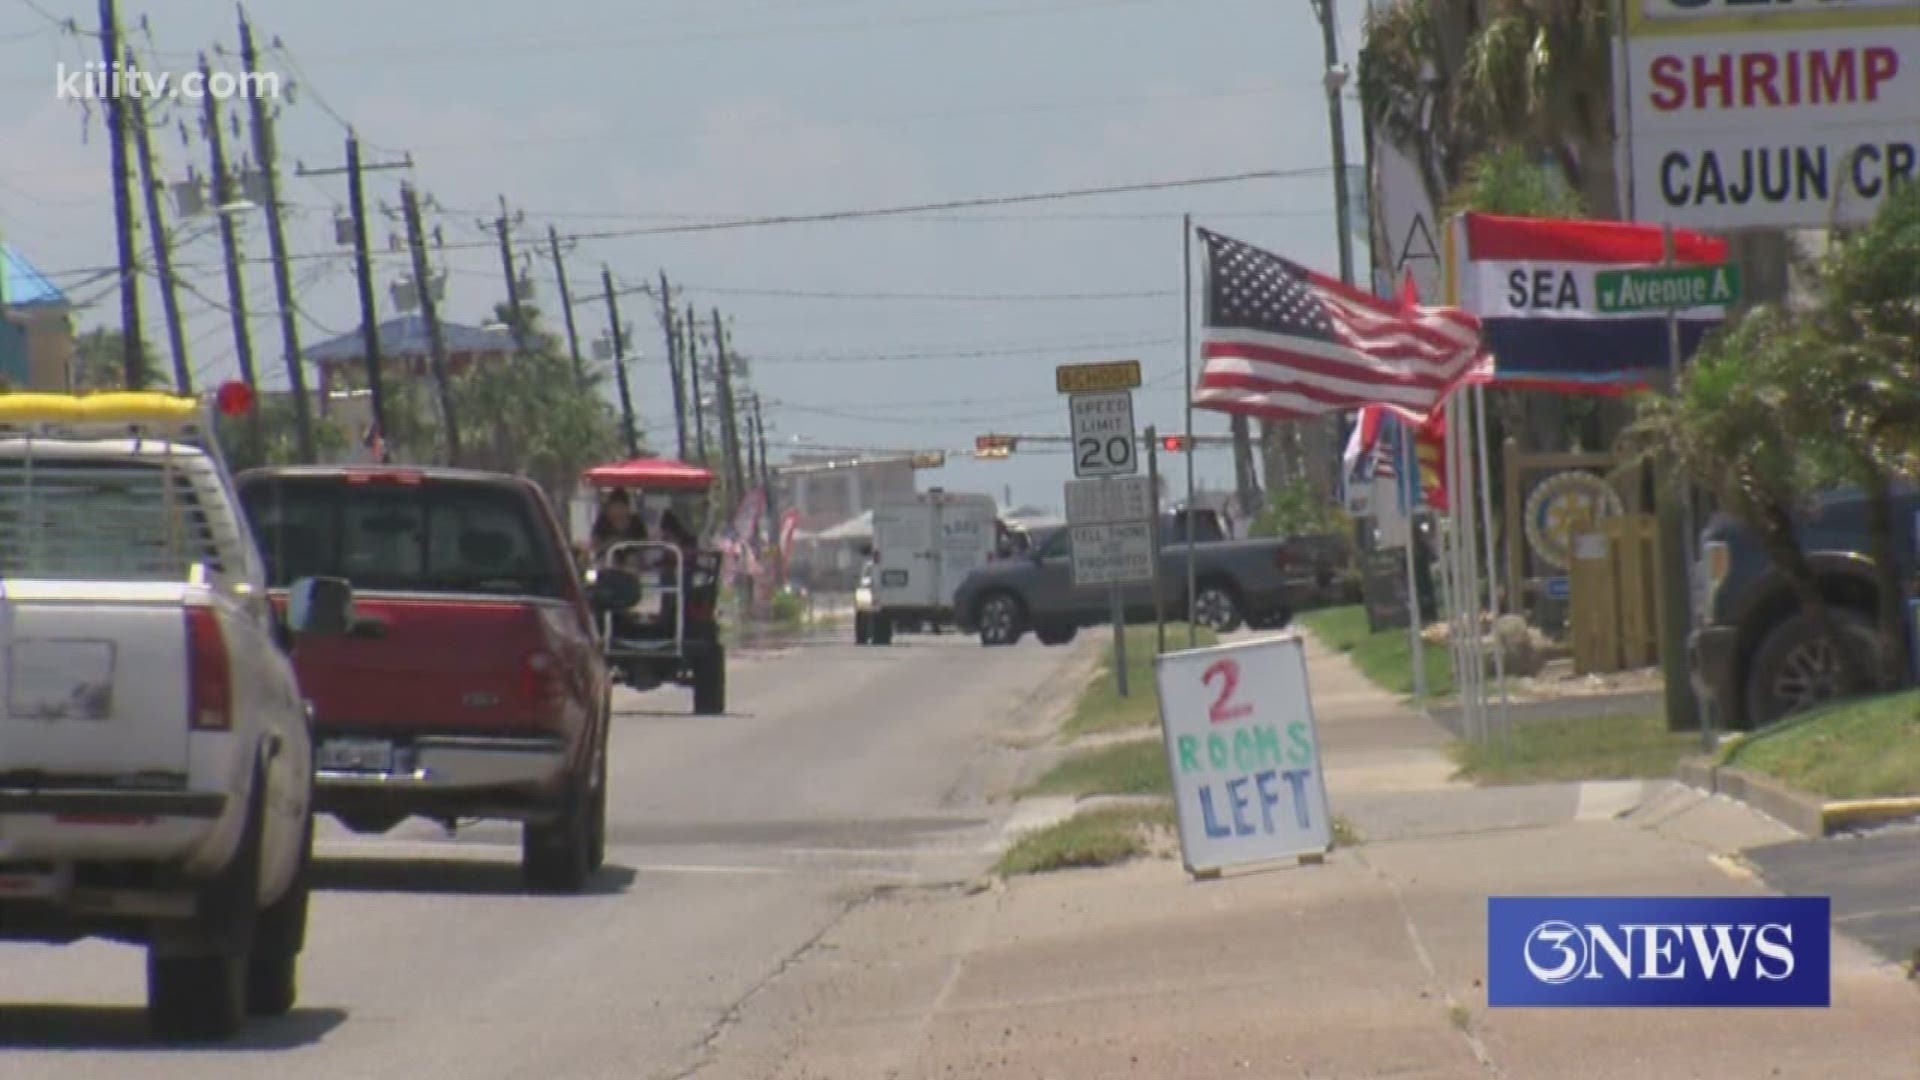 This week in Port Aransas residents and visitors were allowed to enjoy the beach as restrictions were lifted.